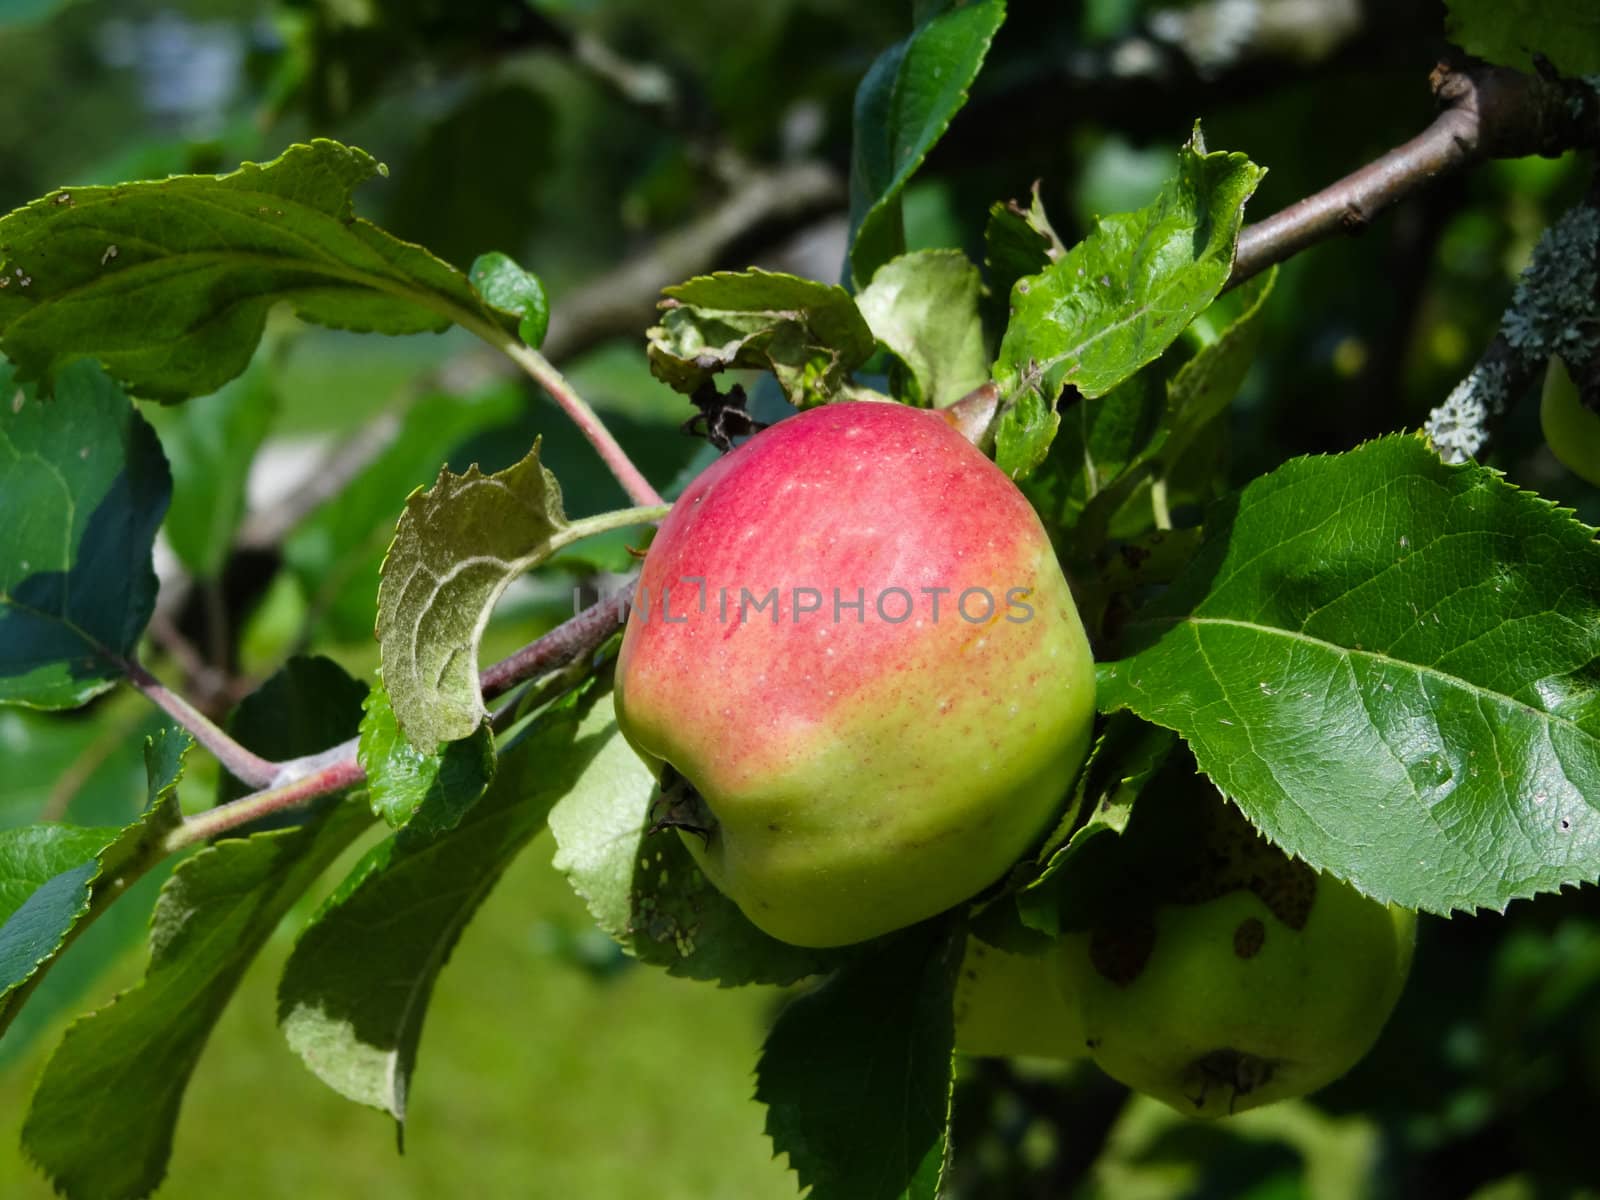 A red and green coloured apple on a tree